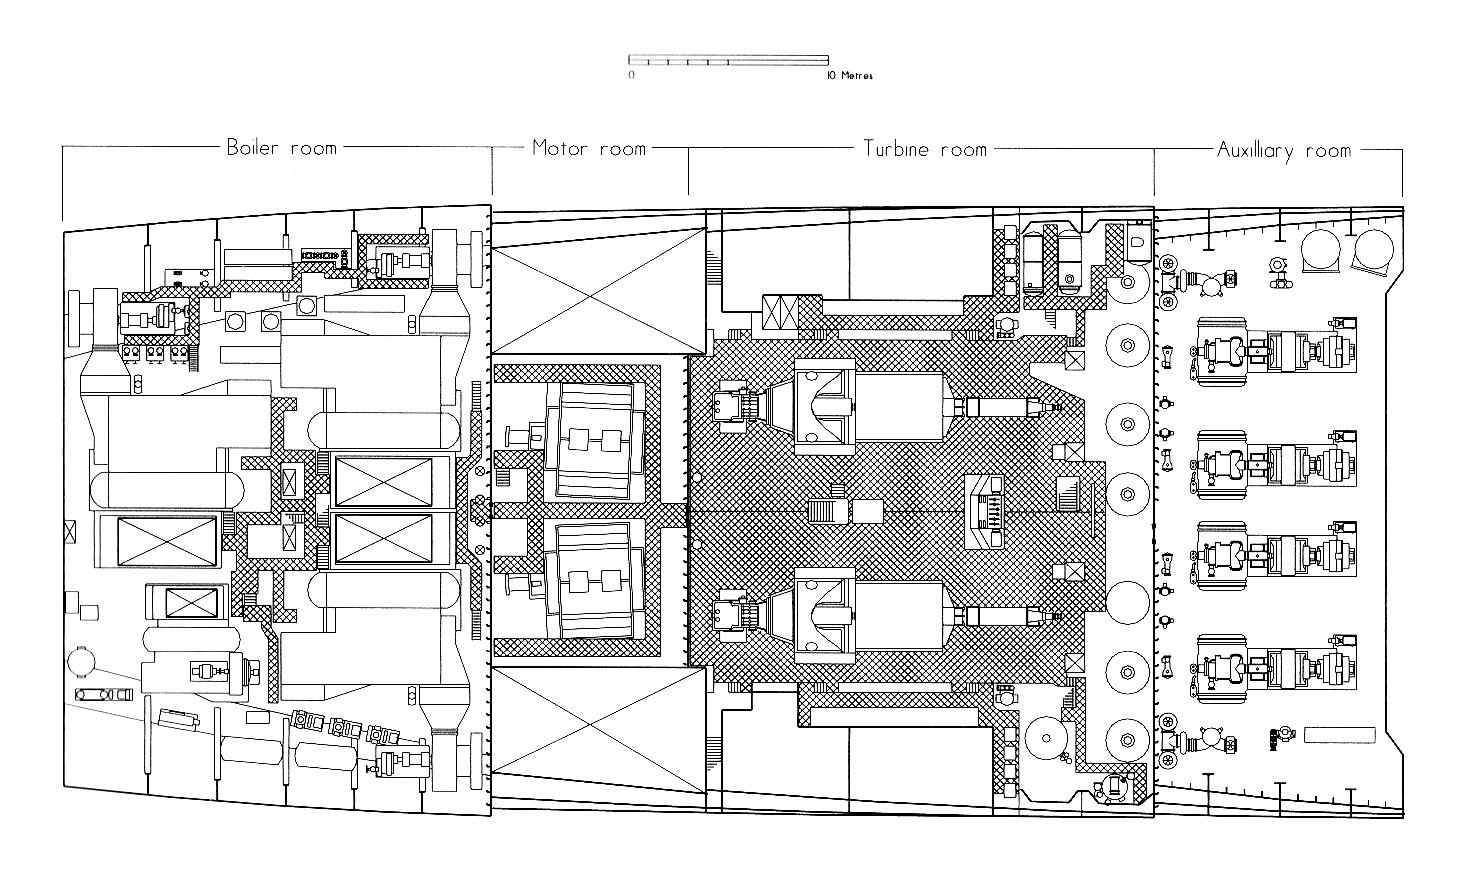 Canberra Plan - Overview of Machinery Spaces.JPG